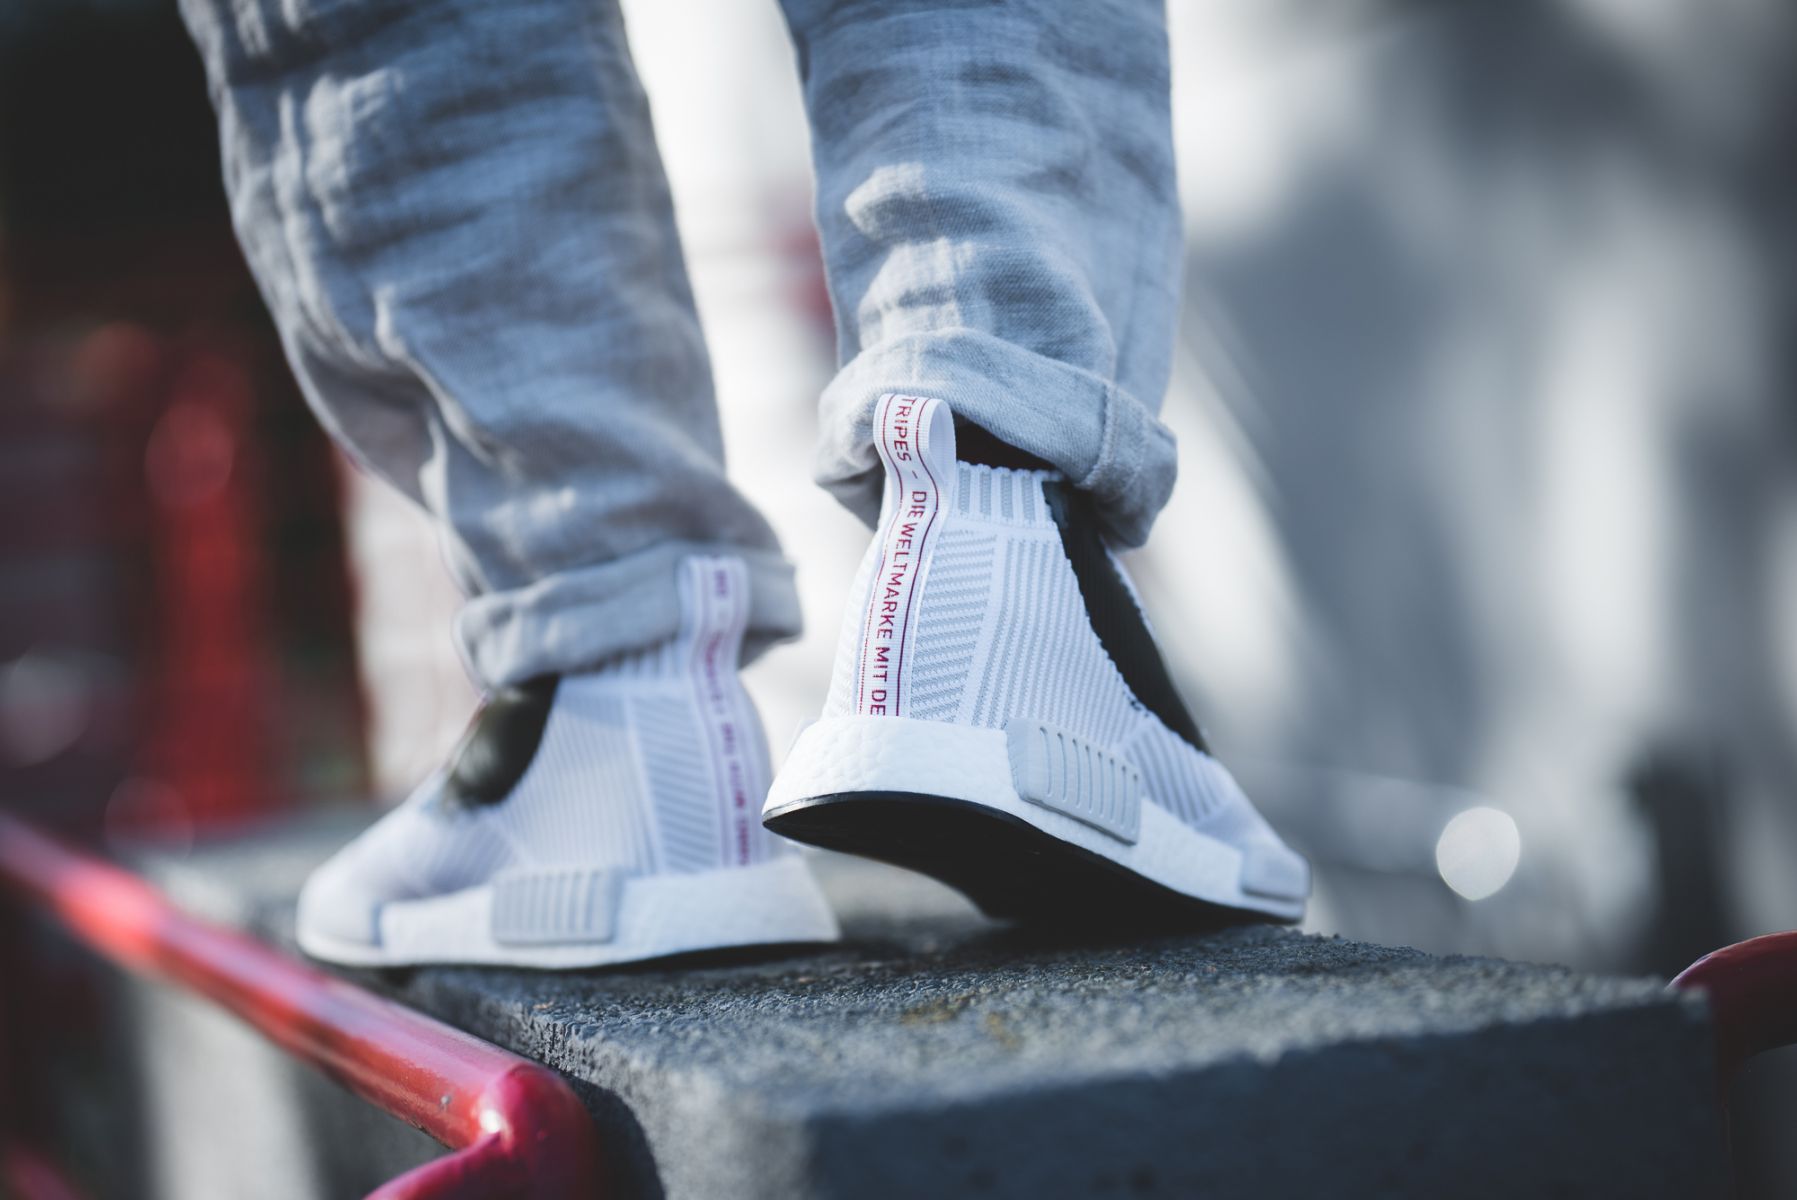 Prisionero texto cupón The Sole Restocks on Twitter: "If the adidas NMD CS1 Koi Fish dropped a  year ago it would have been an instant sell out! https://t.co/HY3lQawLJy  https://t.co/9TqHoVhVuz" / Twitter